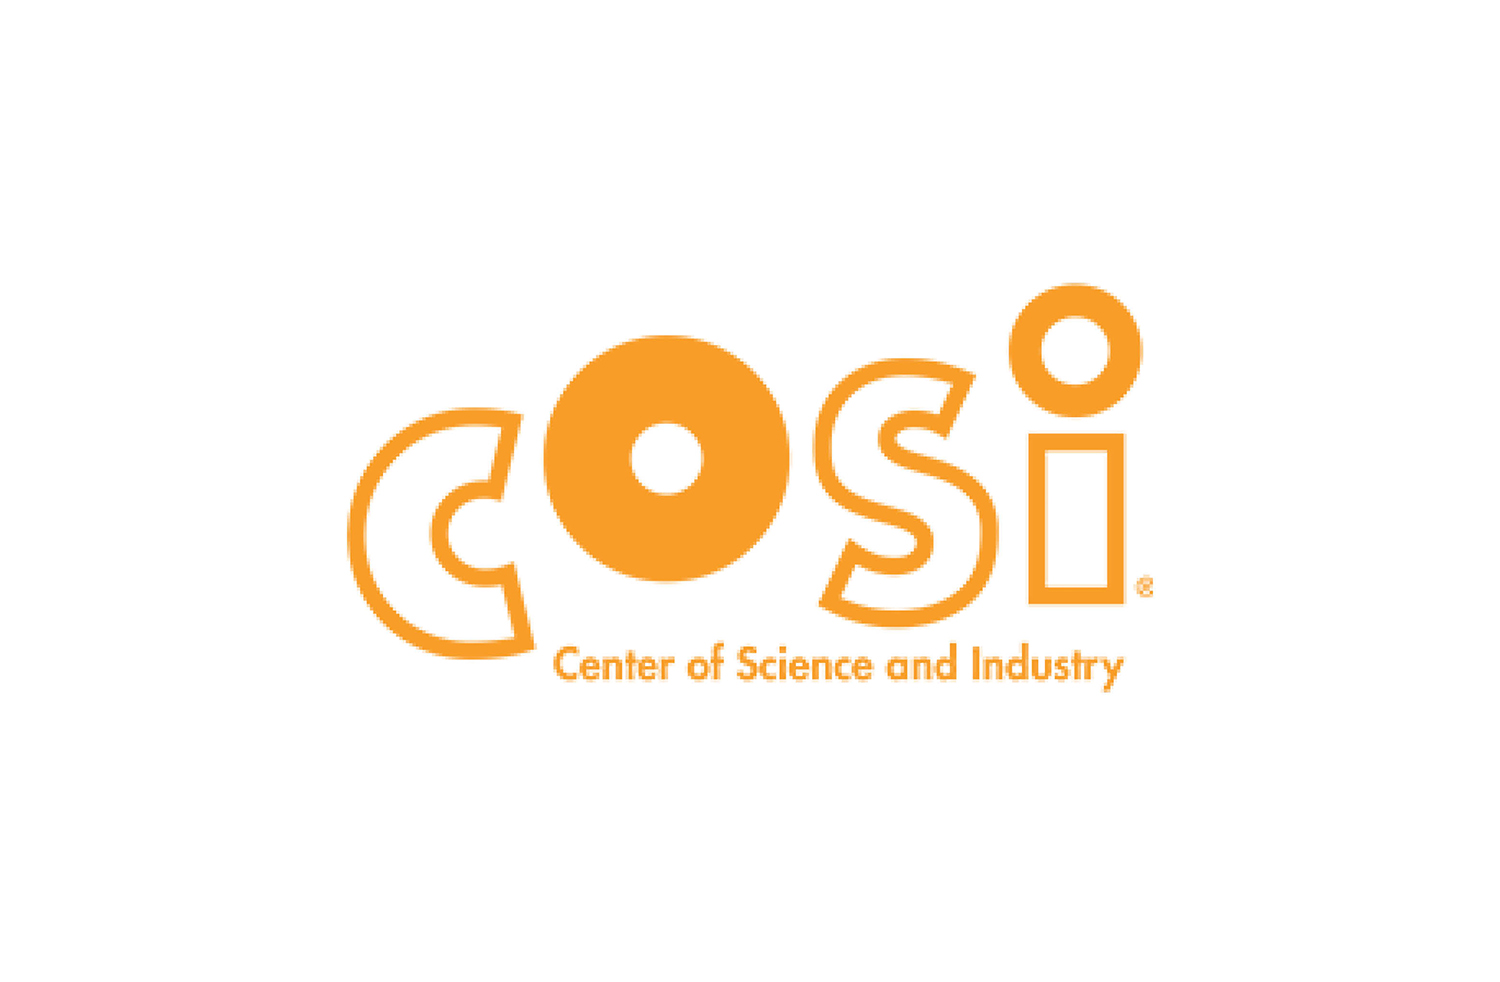 Boss_Display_Client_COSI_Center_of_Science_and_Industry_Logo.jpg